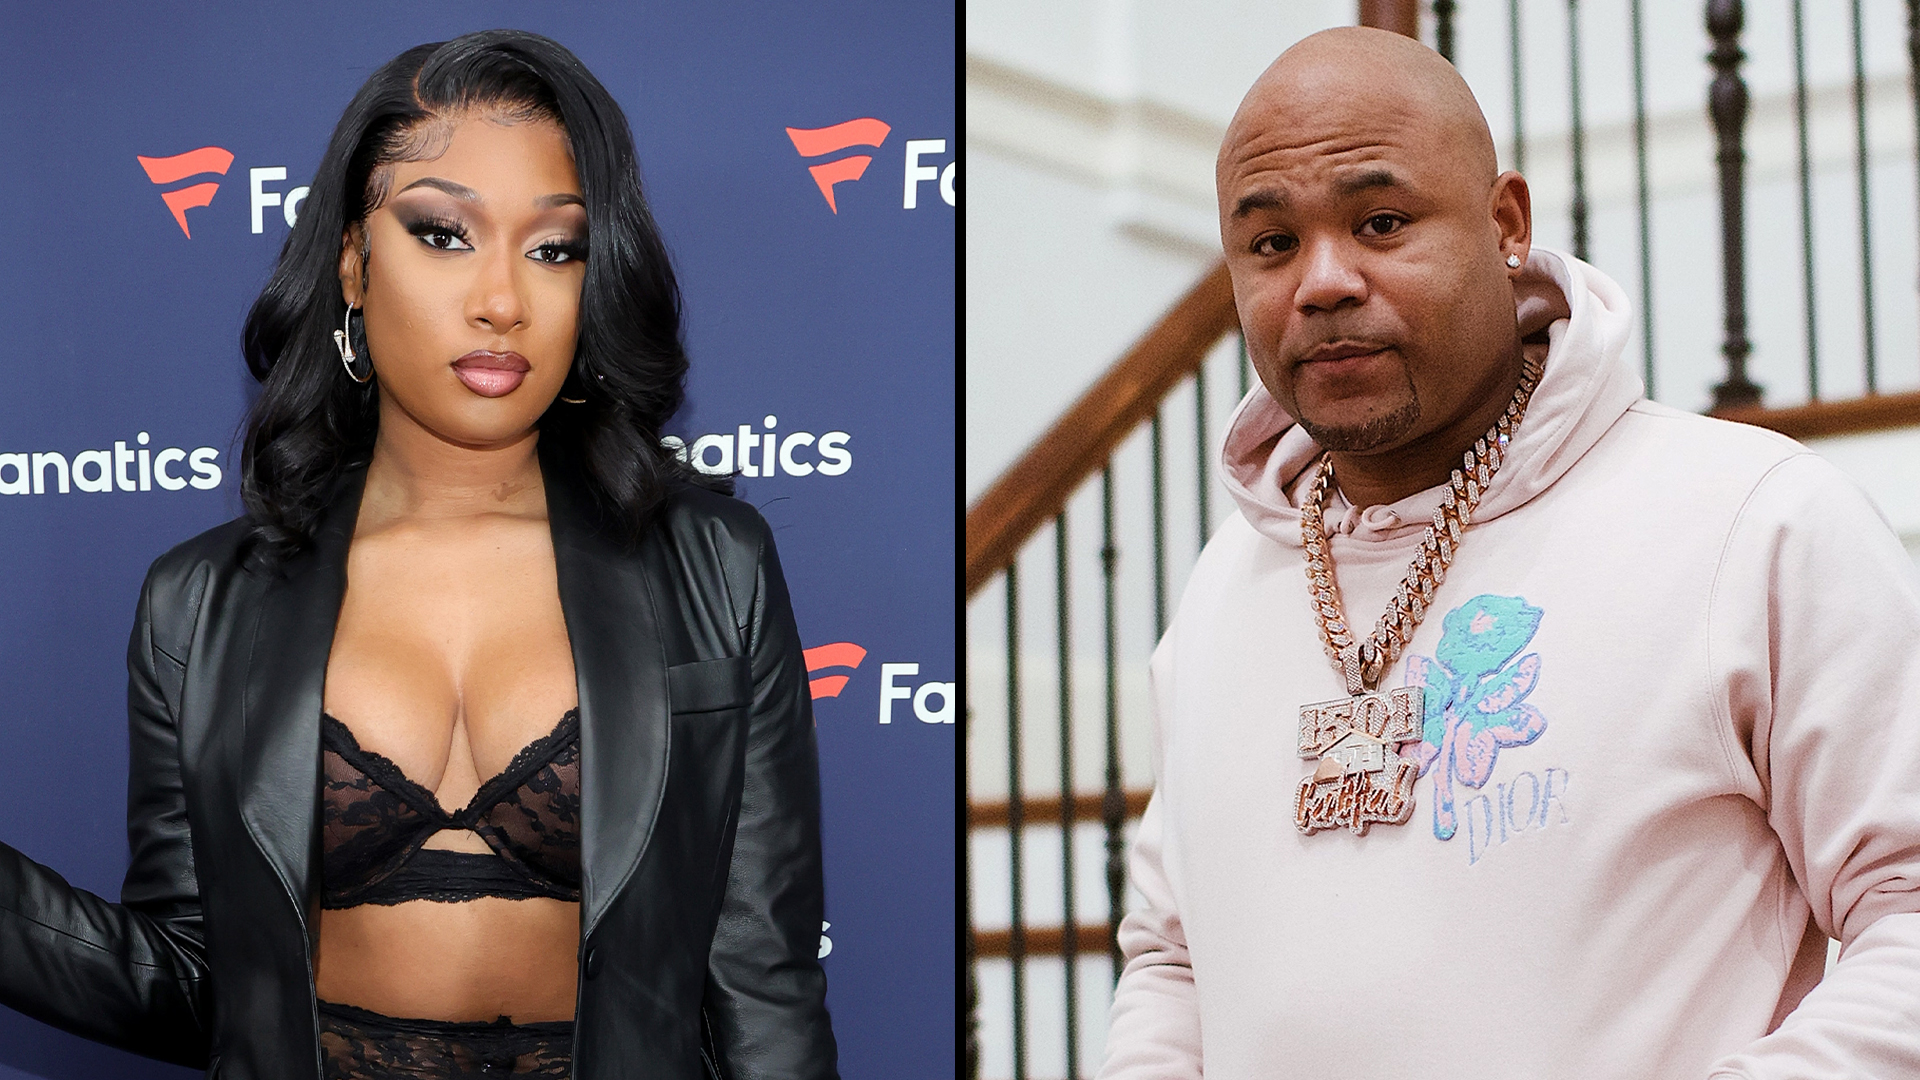 Megan Thee Stallion's Latest Legal Battle With Carl Crawford Is Yet Another Cautionary Tale For Artists